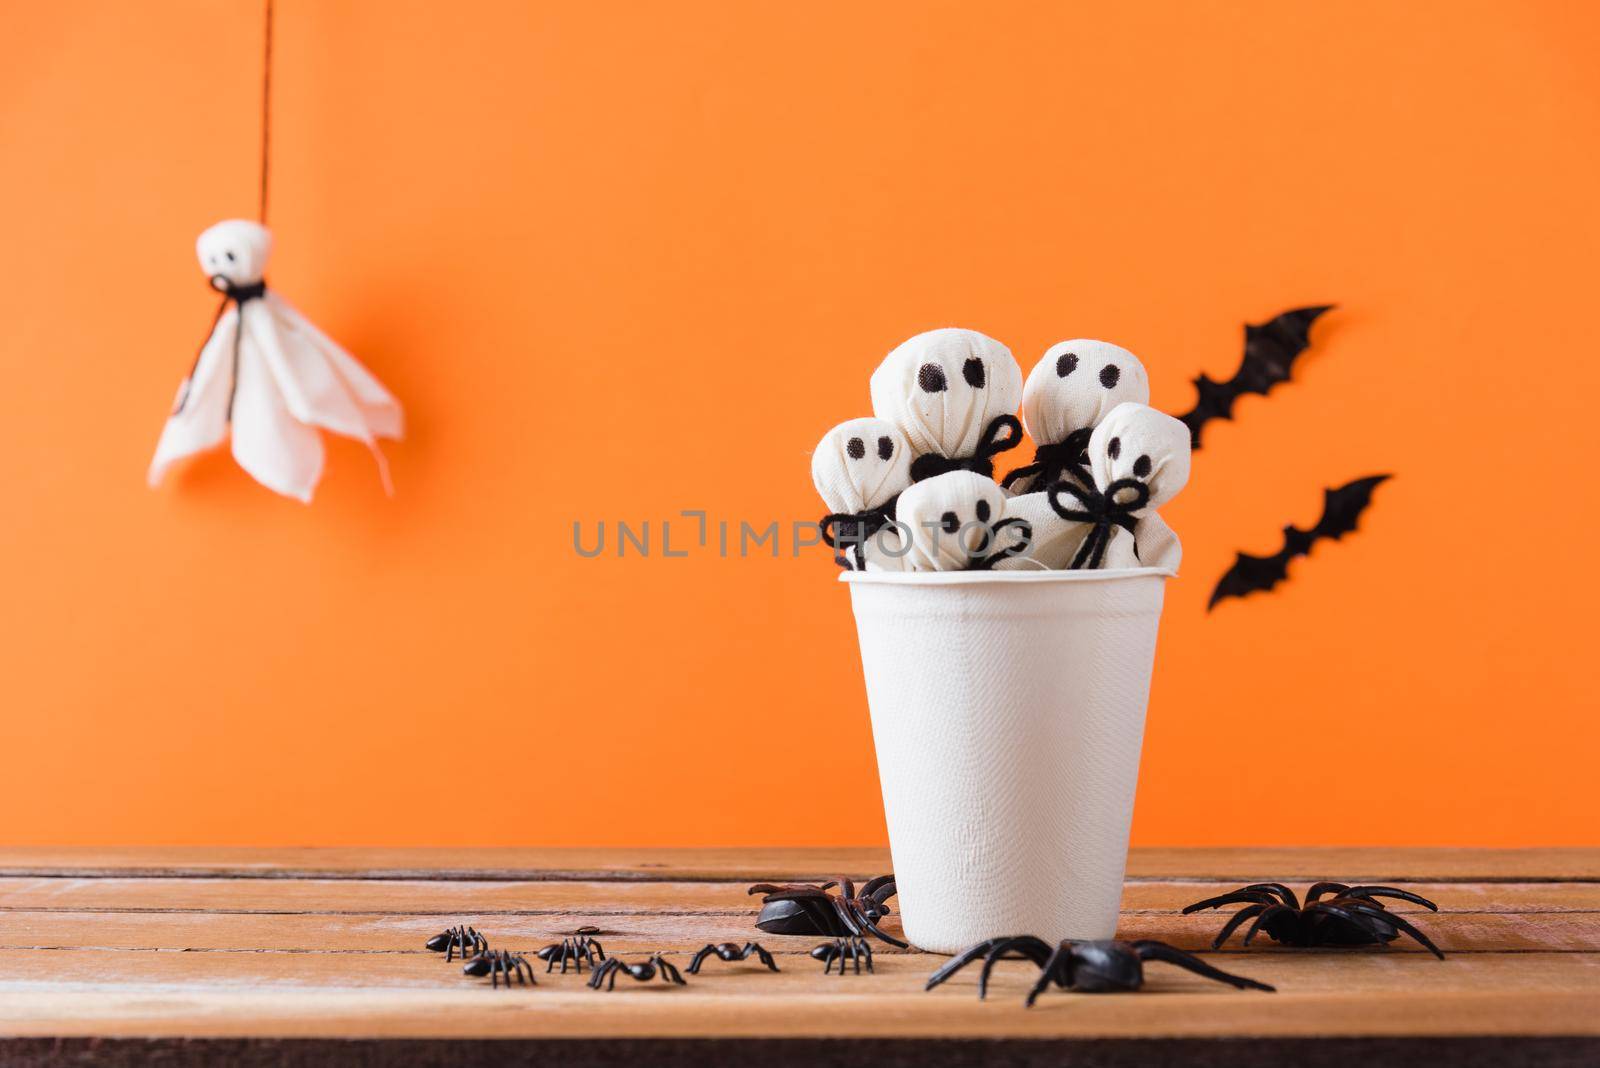 Funny Halloween day decoration party, White ghost crafts scary face head in paper cup on wood table, studio shot isolated on orange background have spider and bats, Happy holiday DIY concept